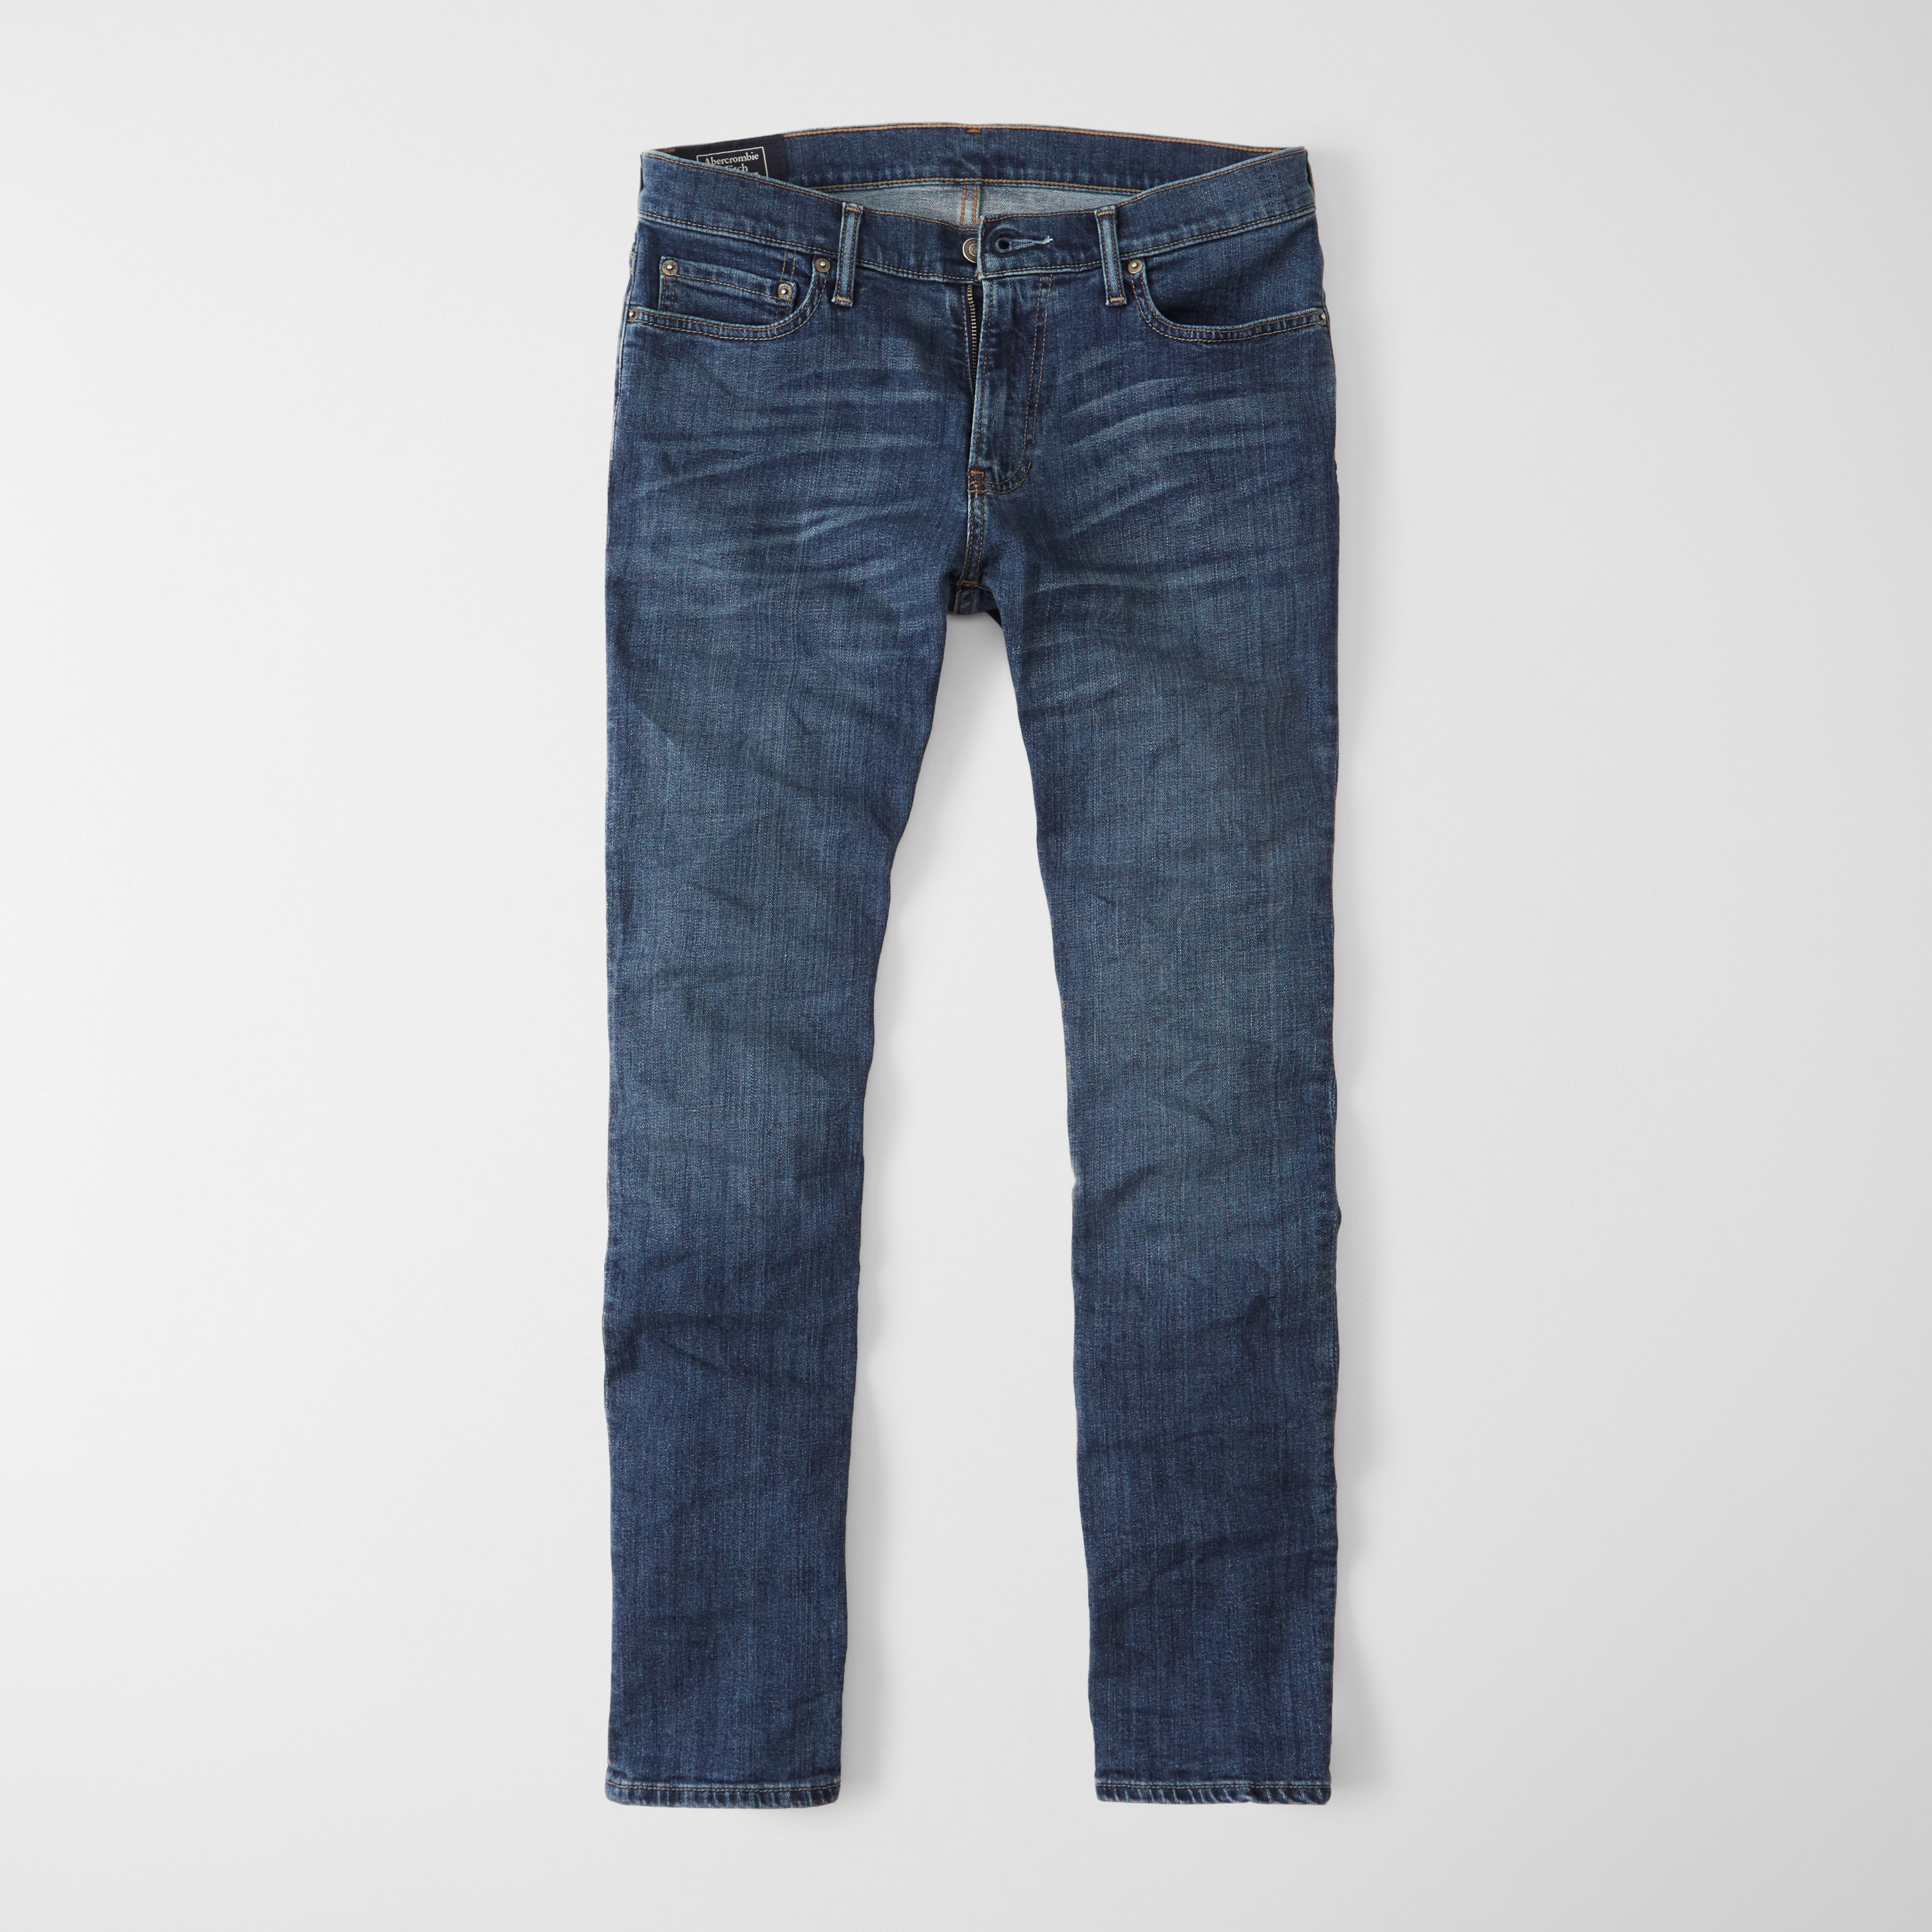 abercrombie and fitch mens cropped jeans